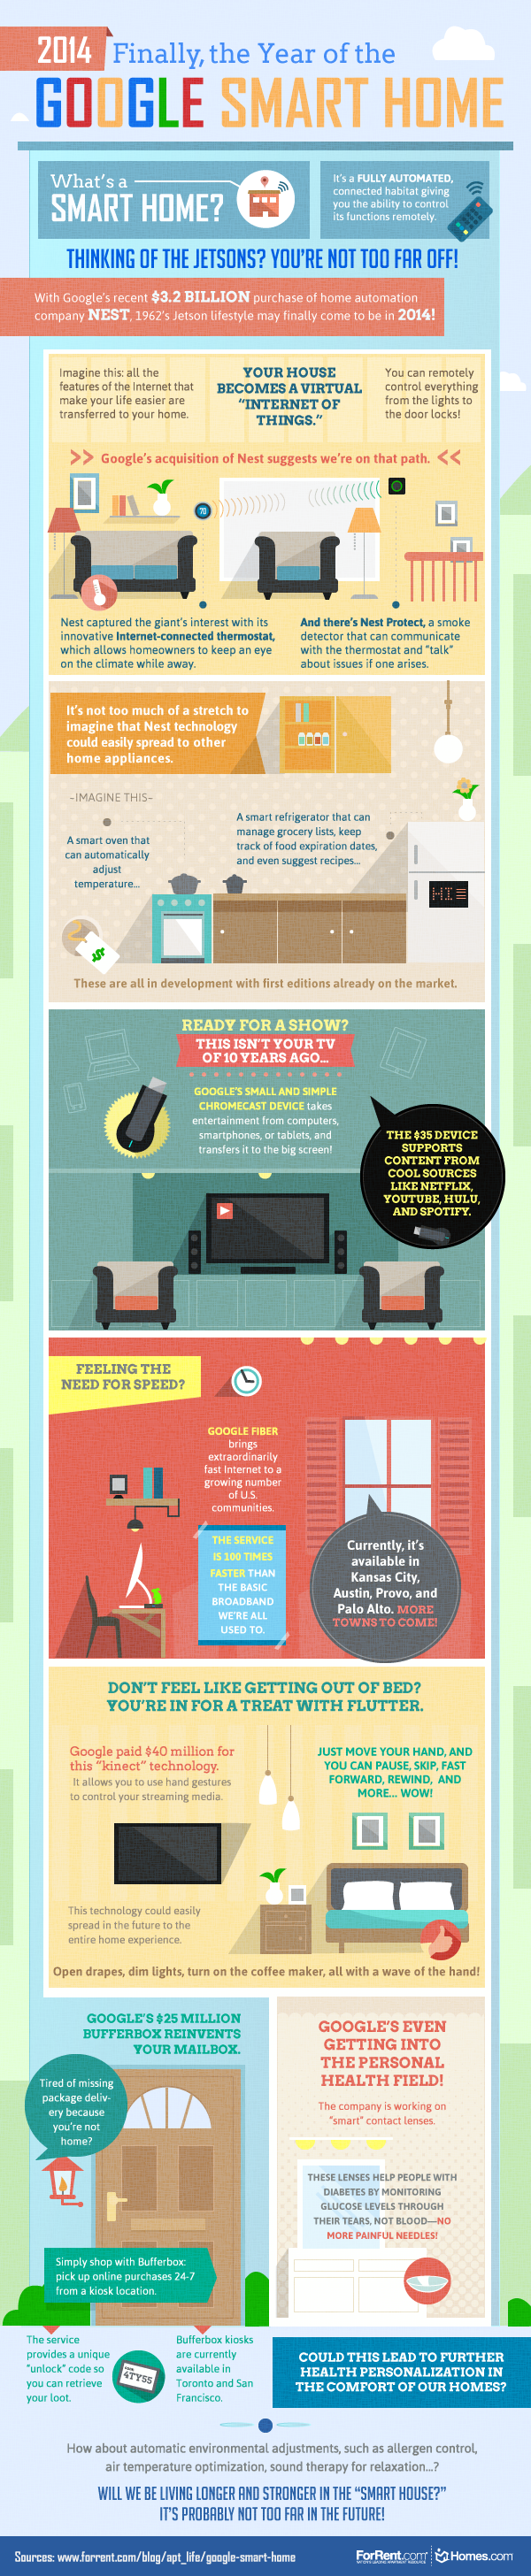 Infographic: The Google Smart Home 